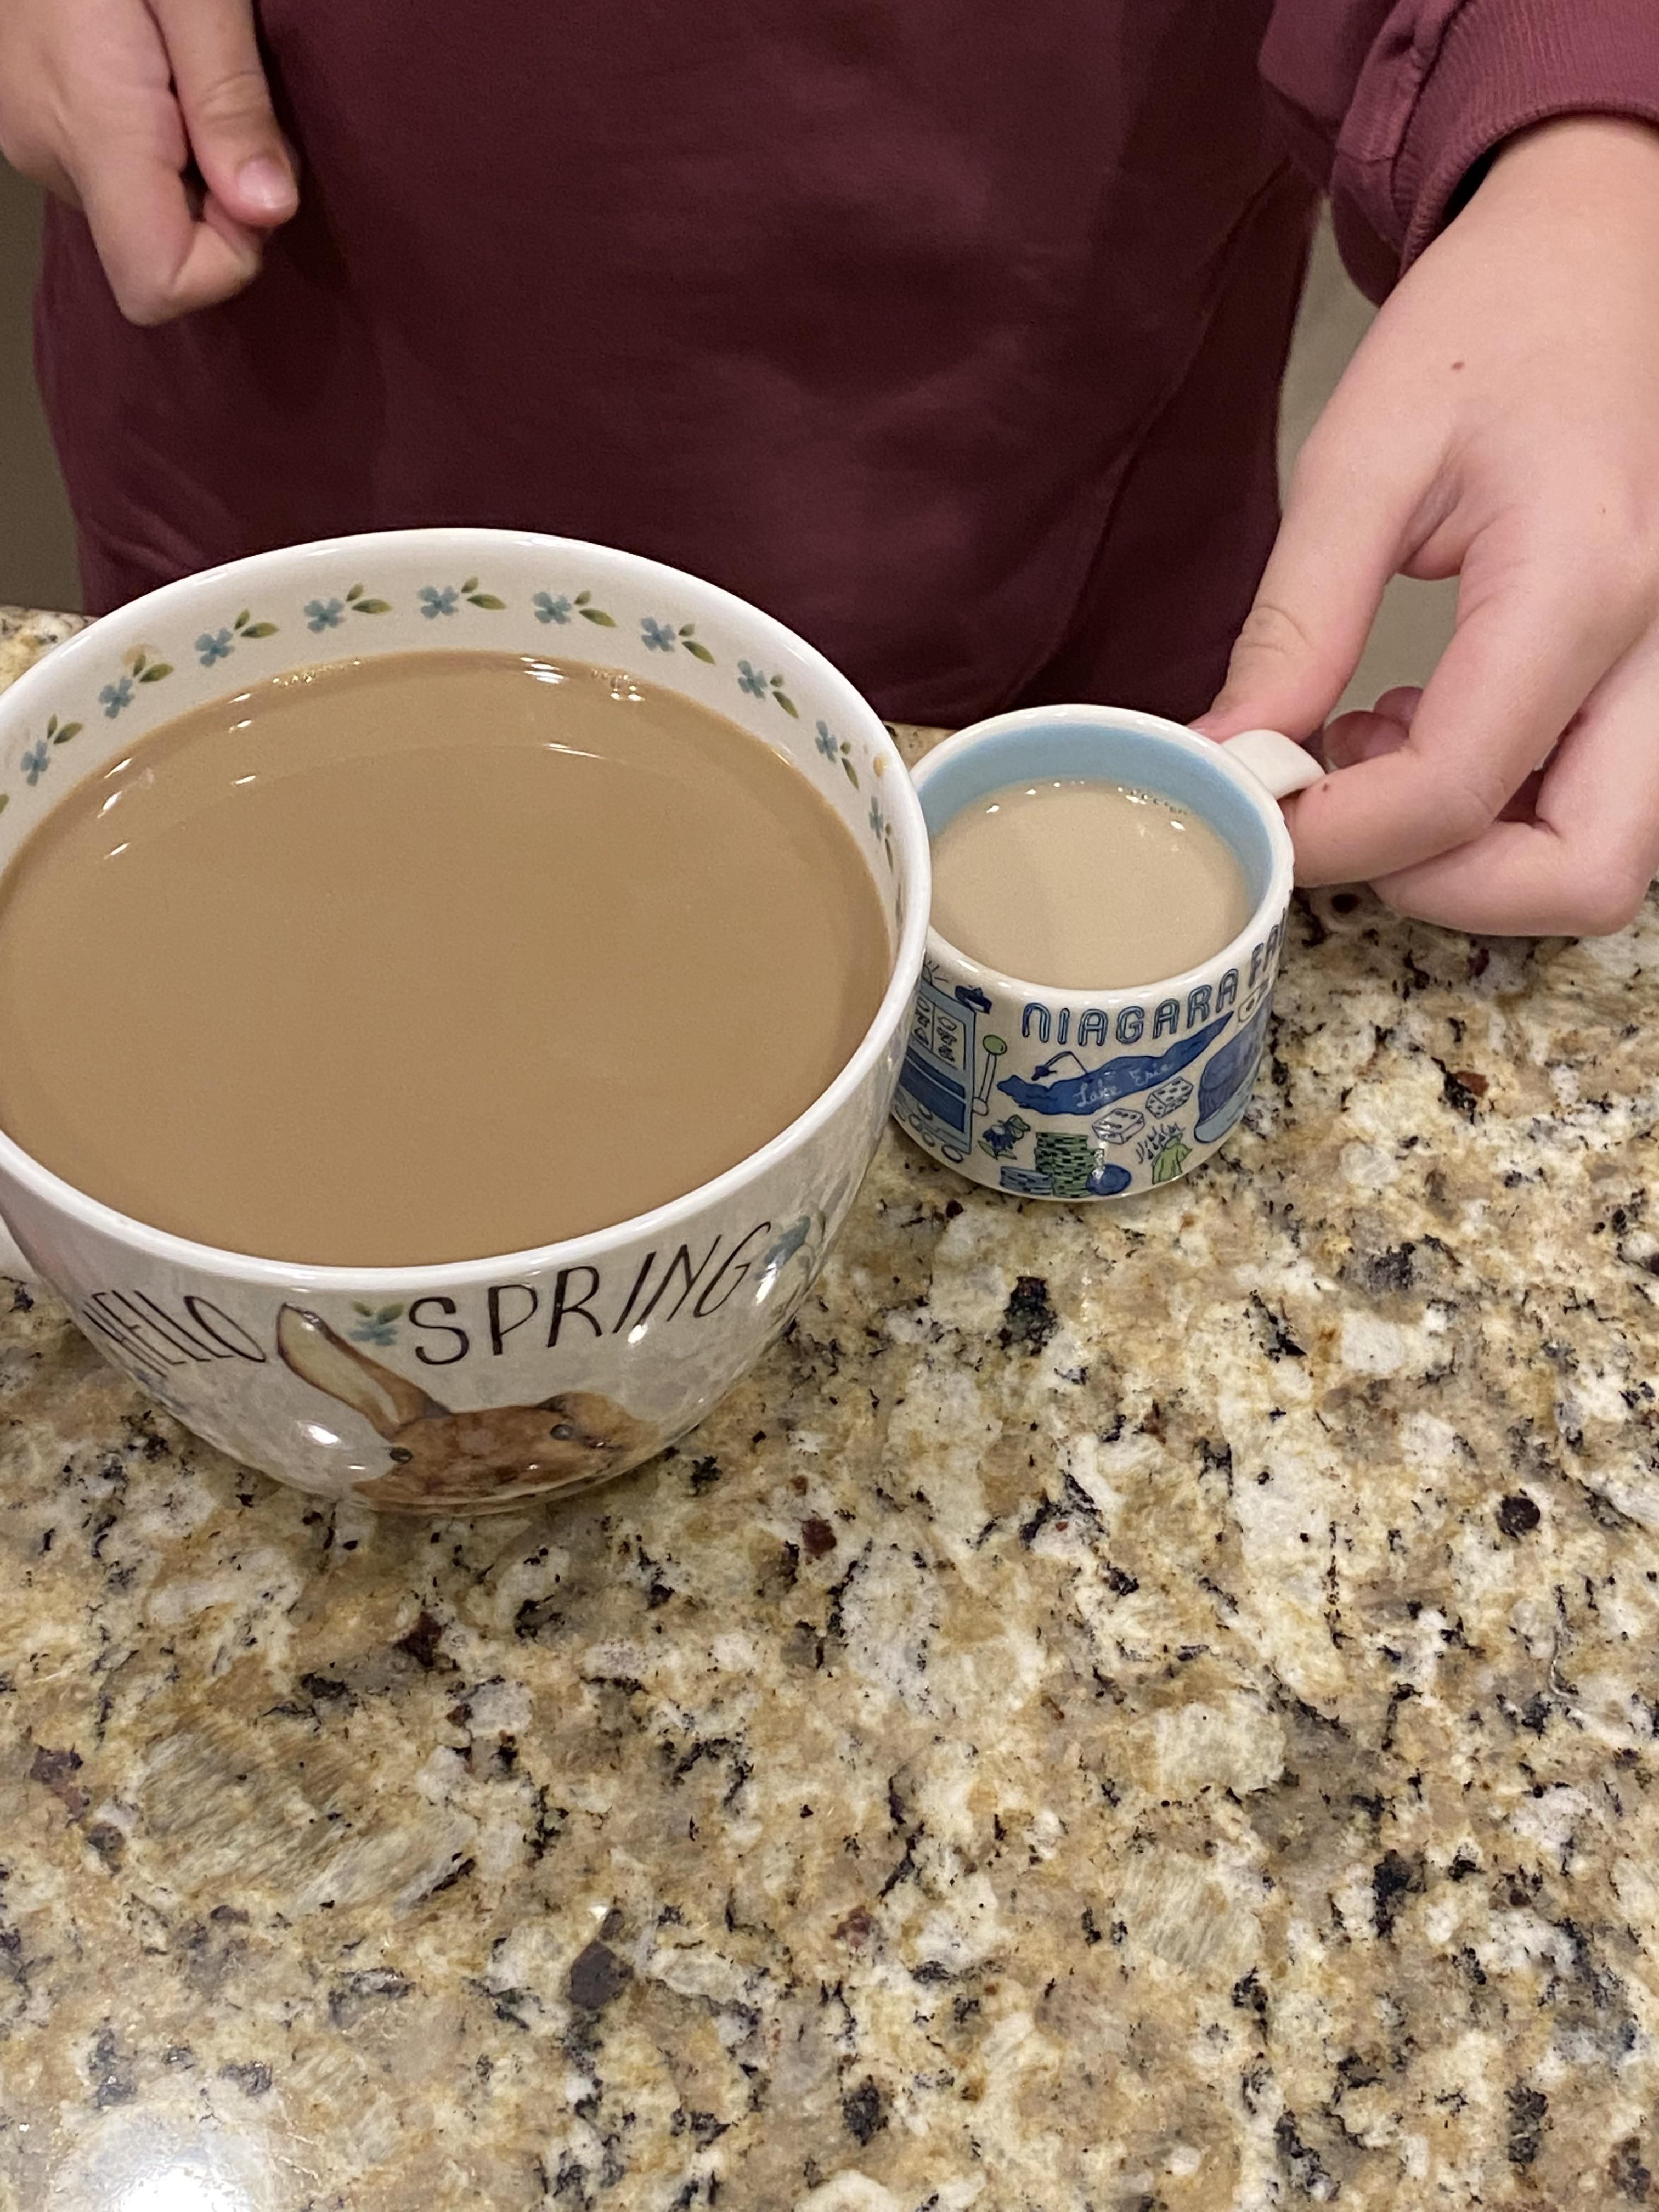 My daughter wanted coffee but she’s 12 so we compromised.